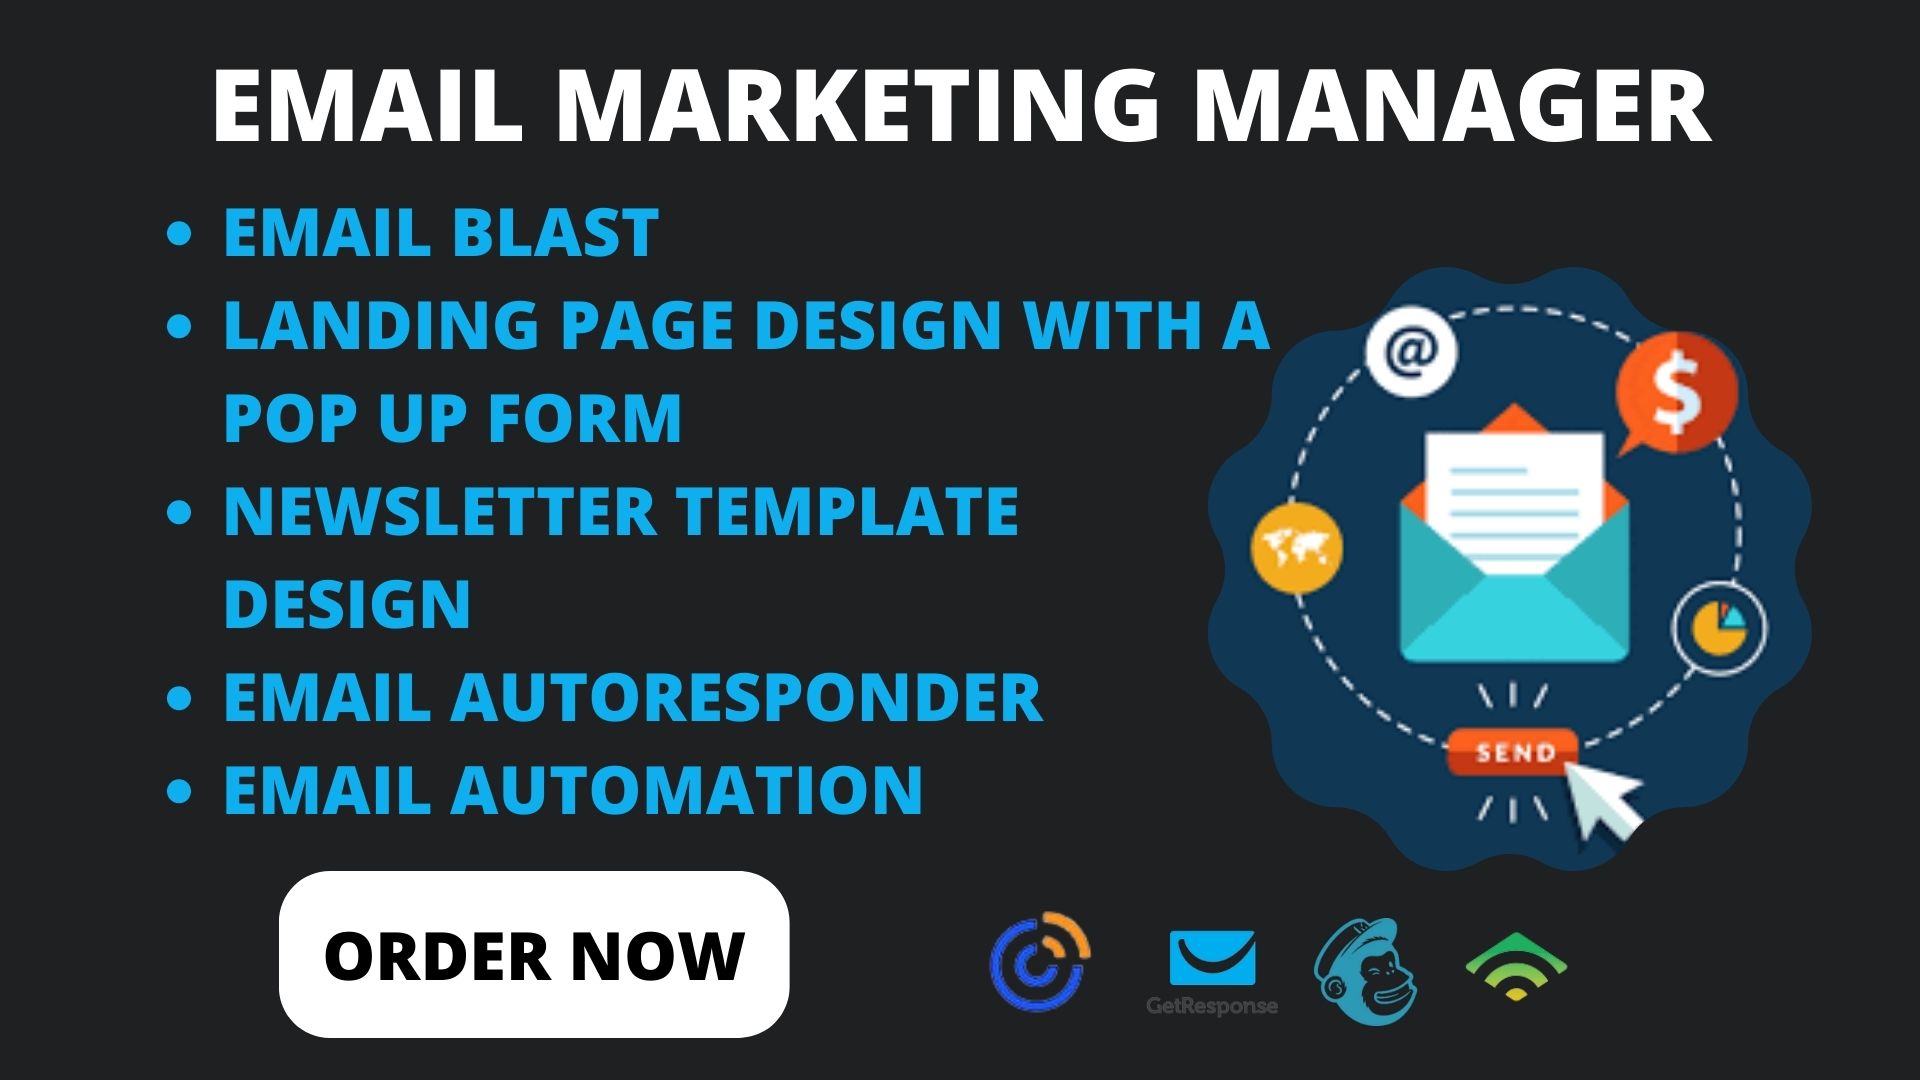 I will be your email marketing manager email marketing manager in getresponse, klaviyo, constant contact, mailchimp, FiverrBox